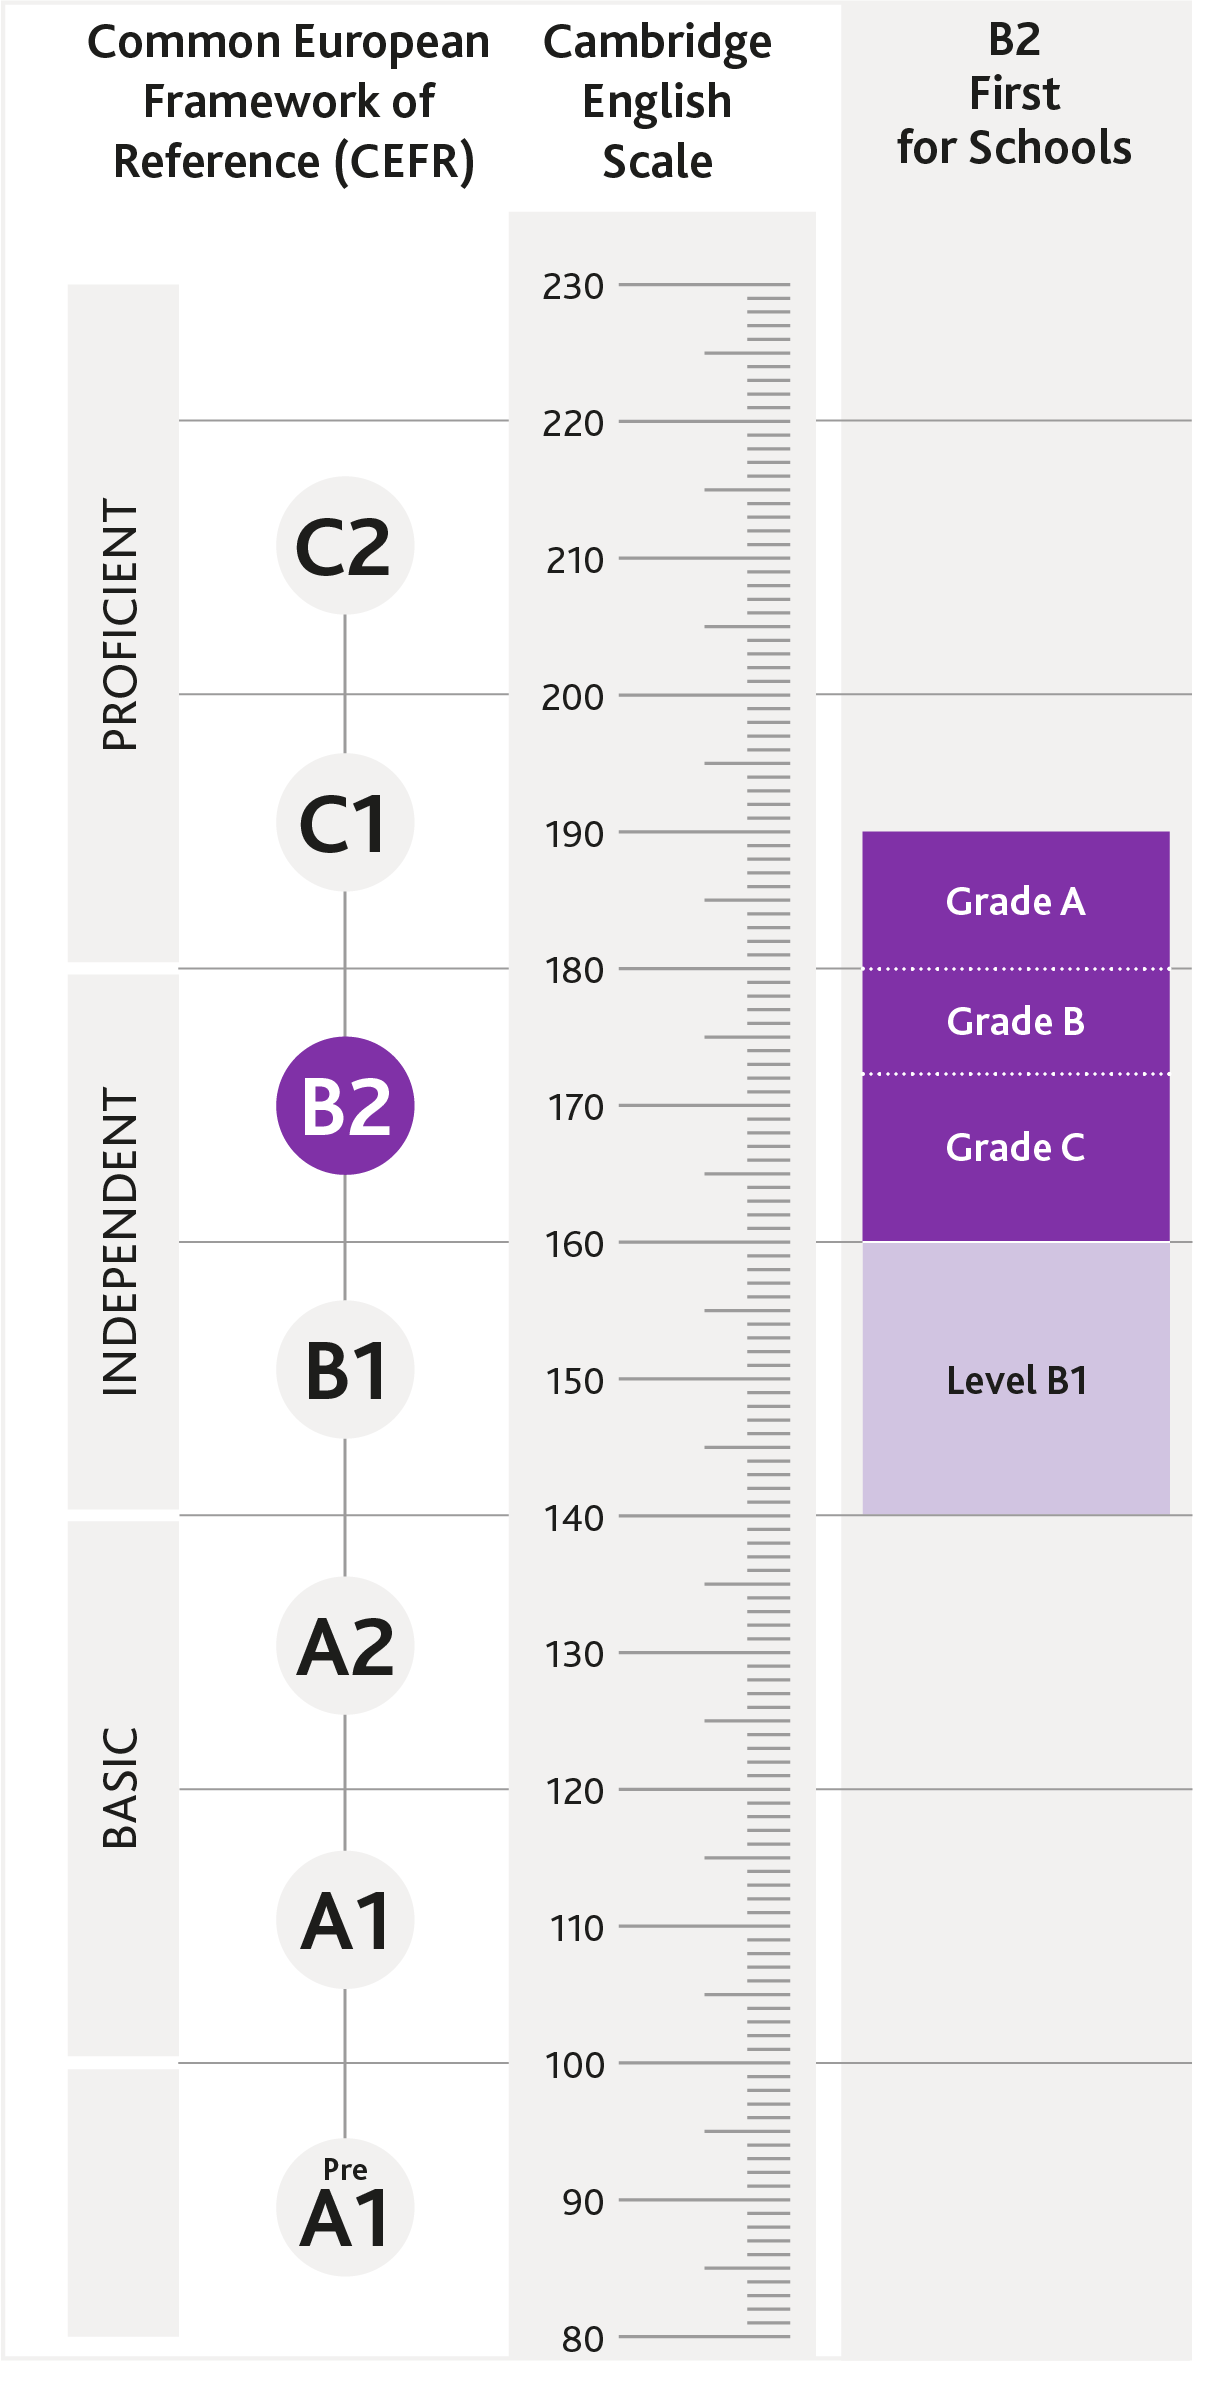 Diagram of where B2 First for Schools is aligned on the CEFR and Cambridge English Scale